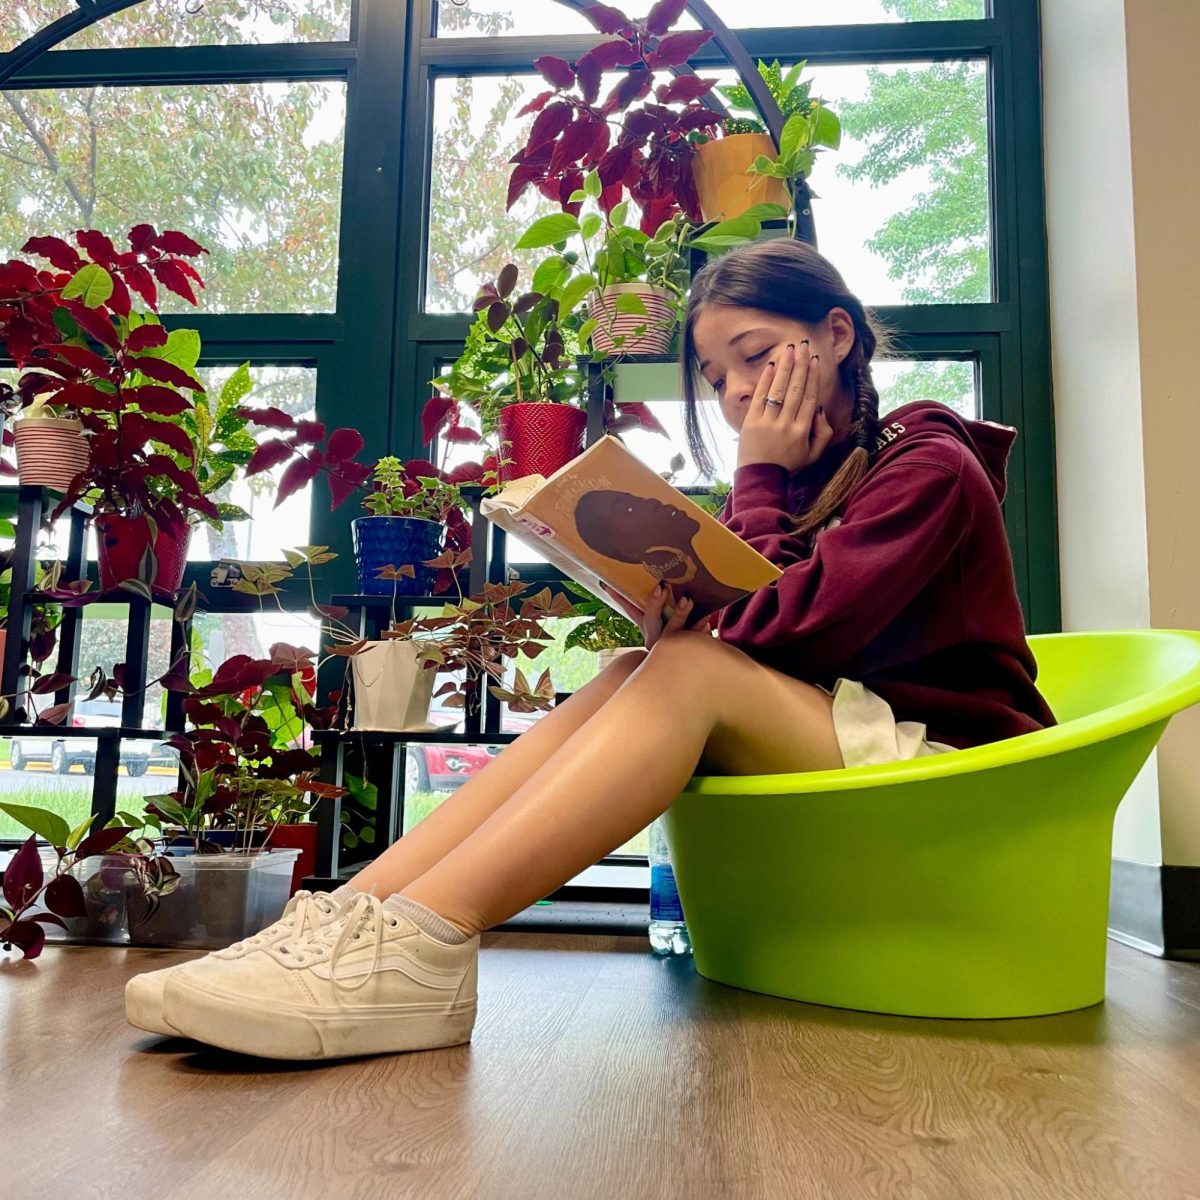 Senior+Kaitlyn+Ornelas+sits+comfortably+in+the+NHS+library.+One+of+her+favorite+ways+to+relax+during+the+summer+is+to+read.++%E2%80%9CI+read+all+the+time%2C%E2%80%9D+Ornelas+said.+%E2%80%9CIt%E2%80%99s+a+good+way+to+chill+and+spend+my+time.%E2%80%9D